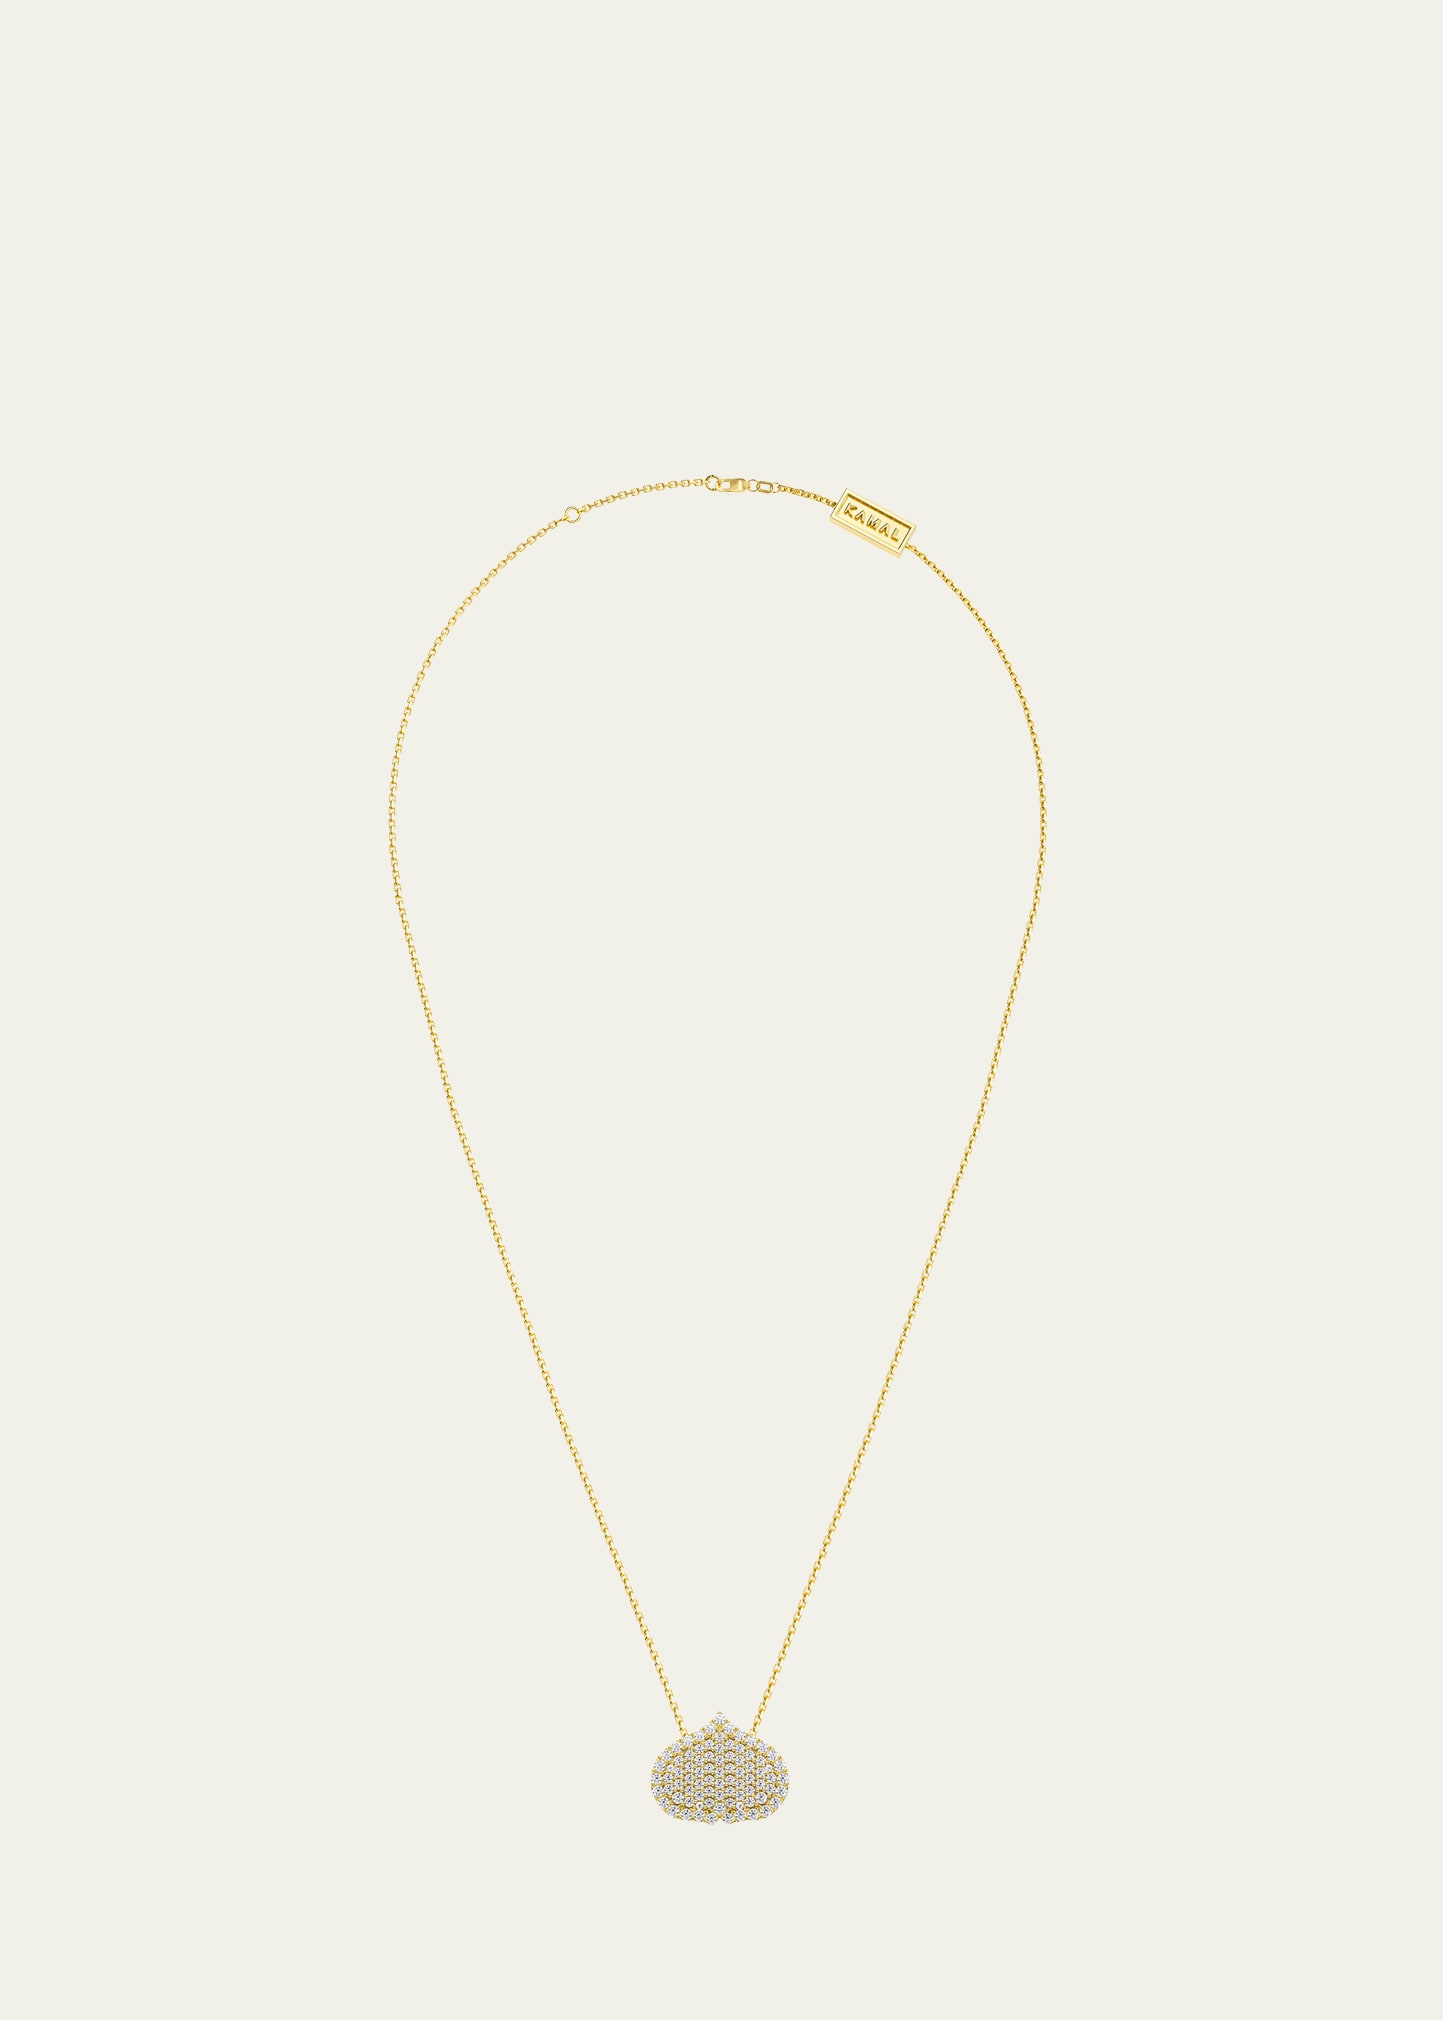 Eye Adore Necklace in Yellow Gold and Diamonds, 15mm